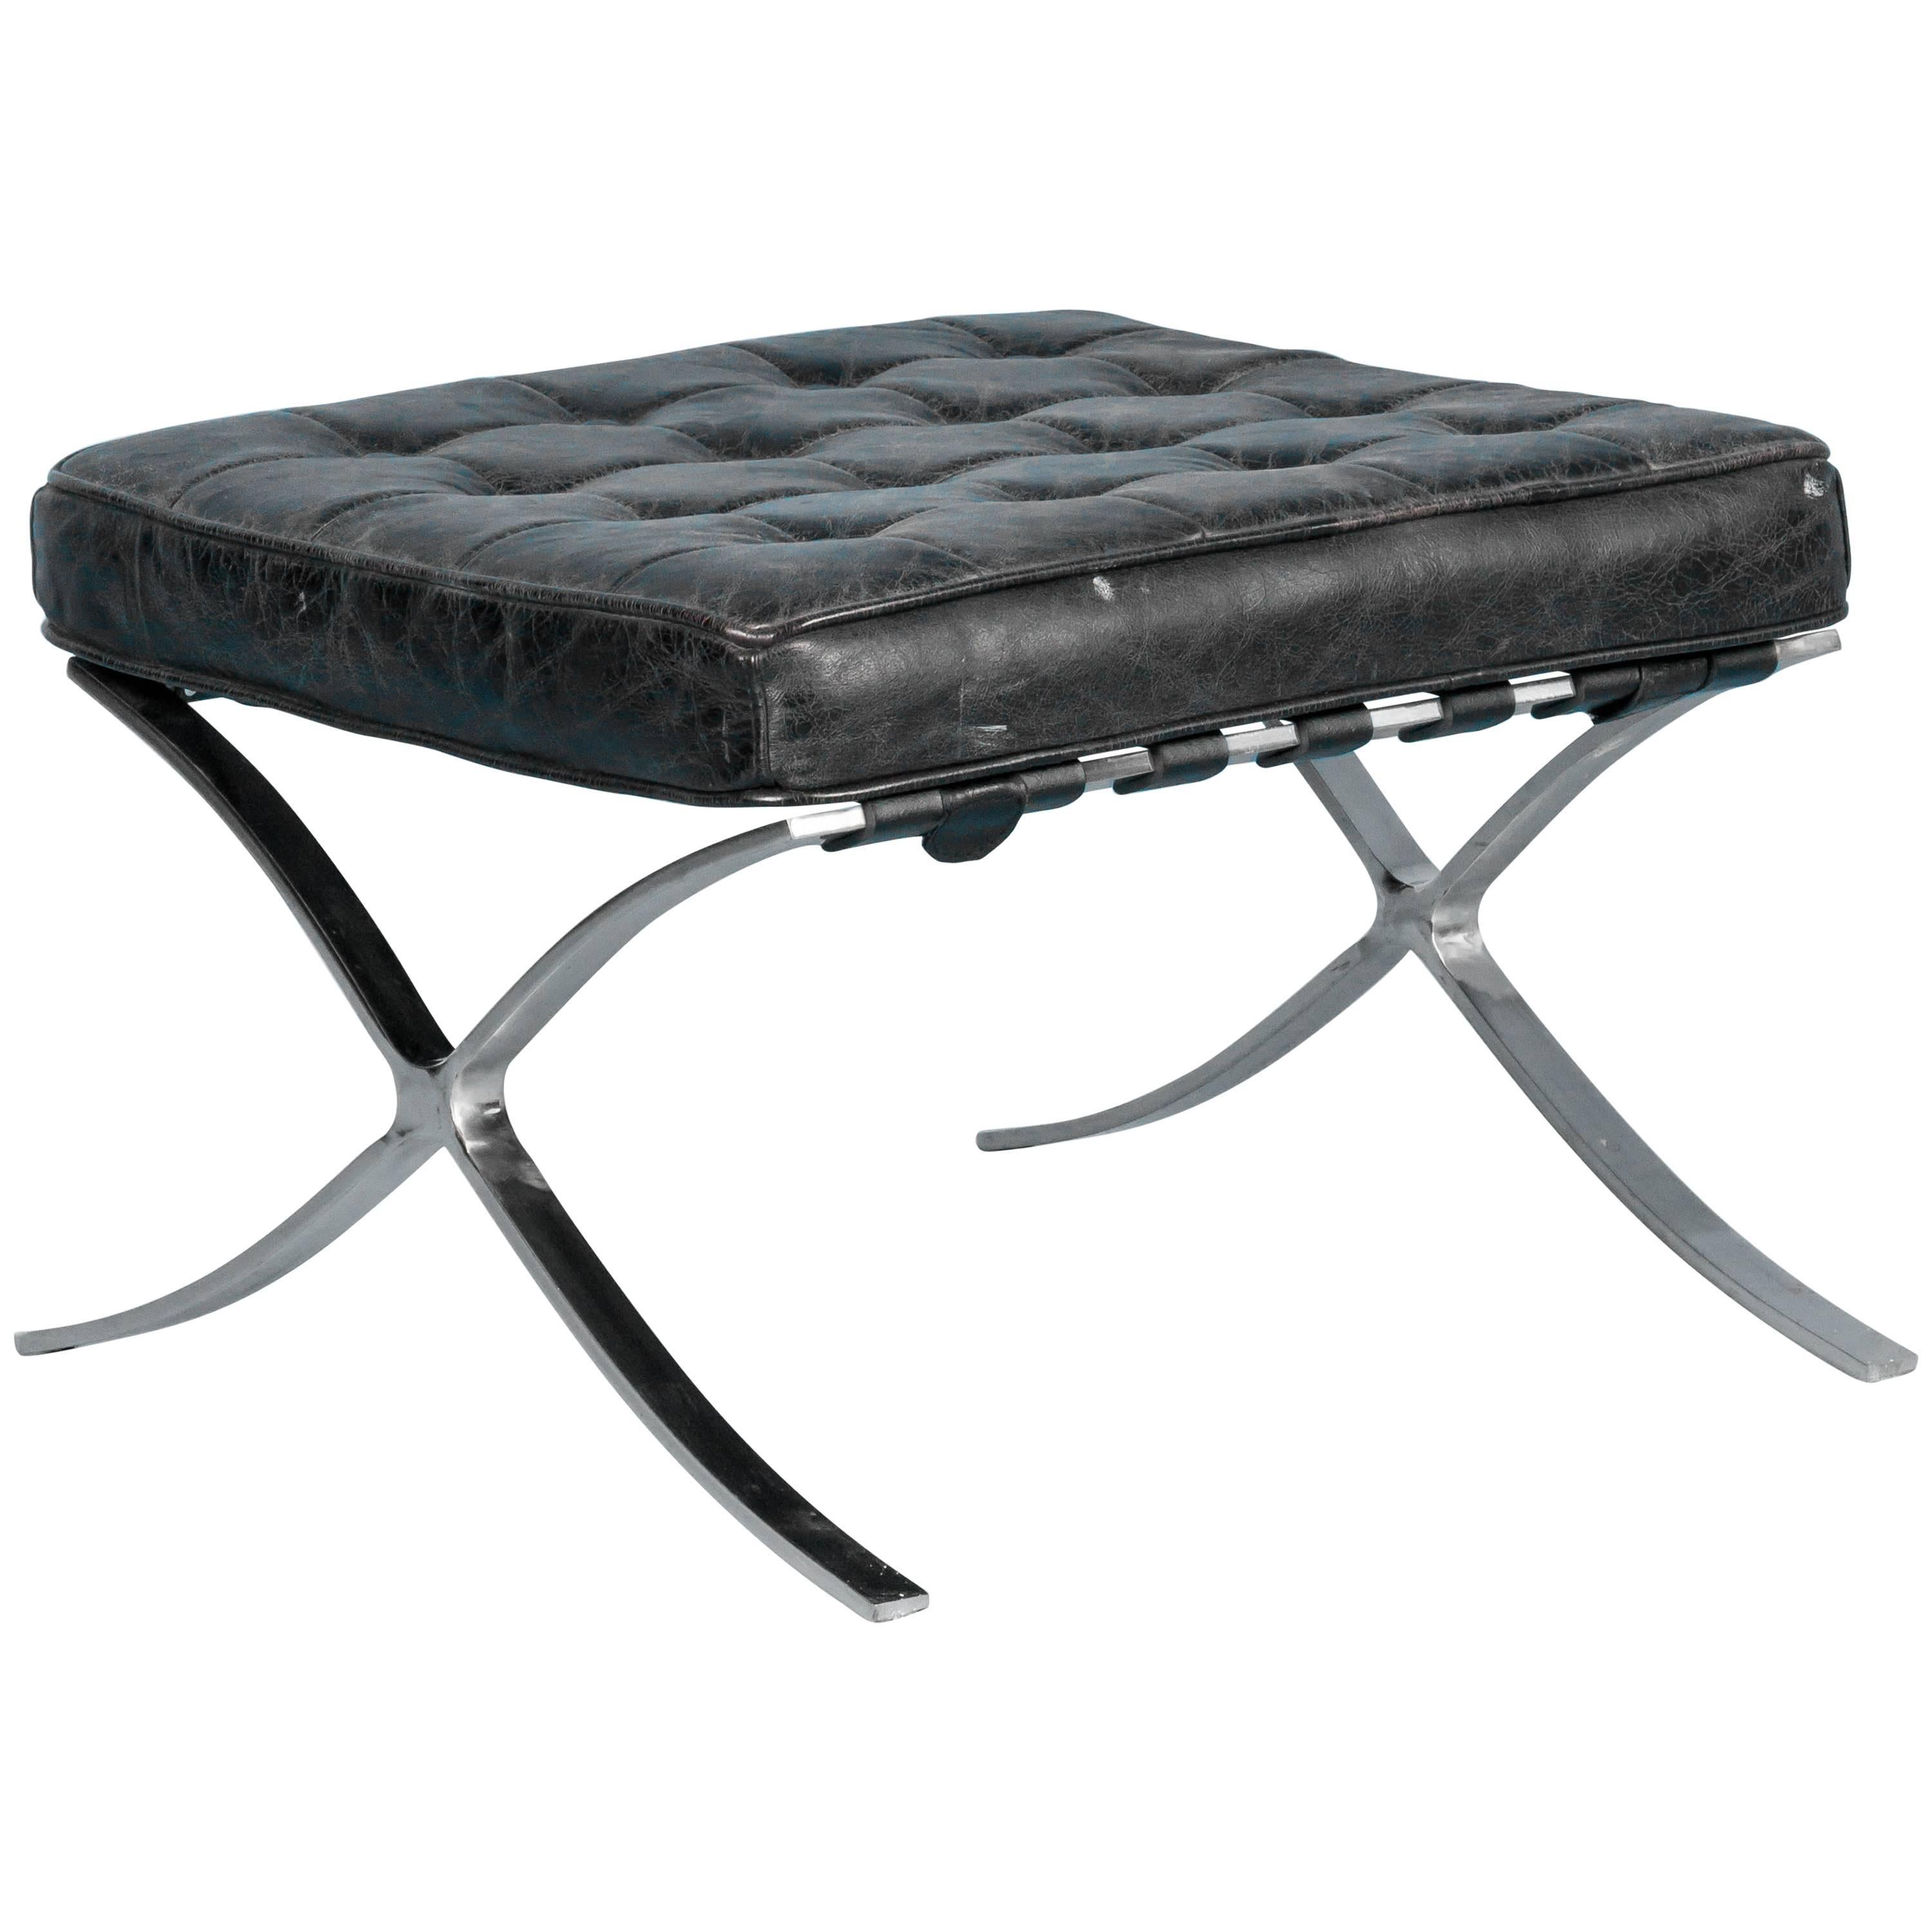 Vintage Looking Black Leather Barcelona Style Ottoman with Chrome Legs